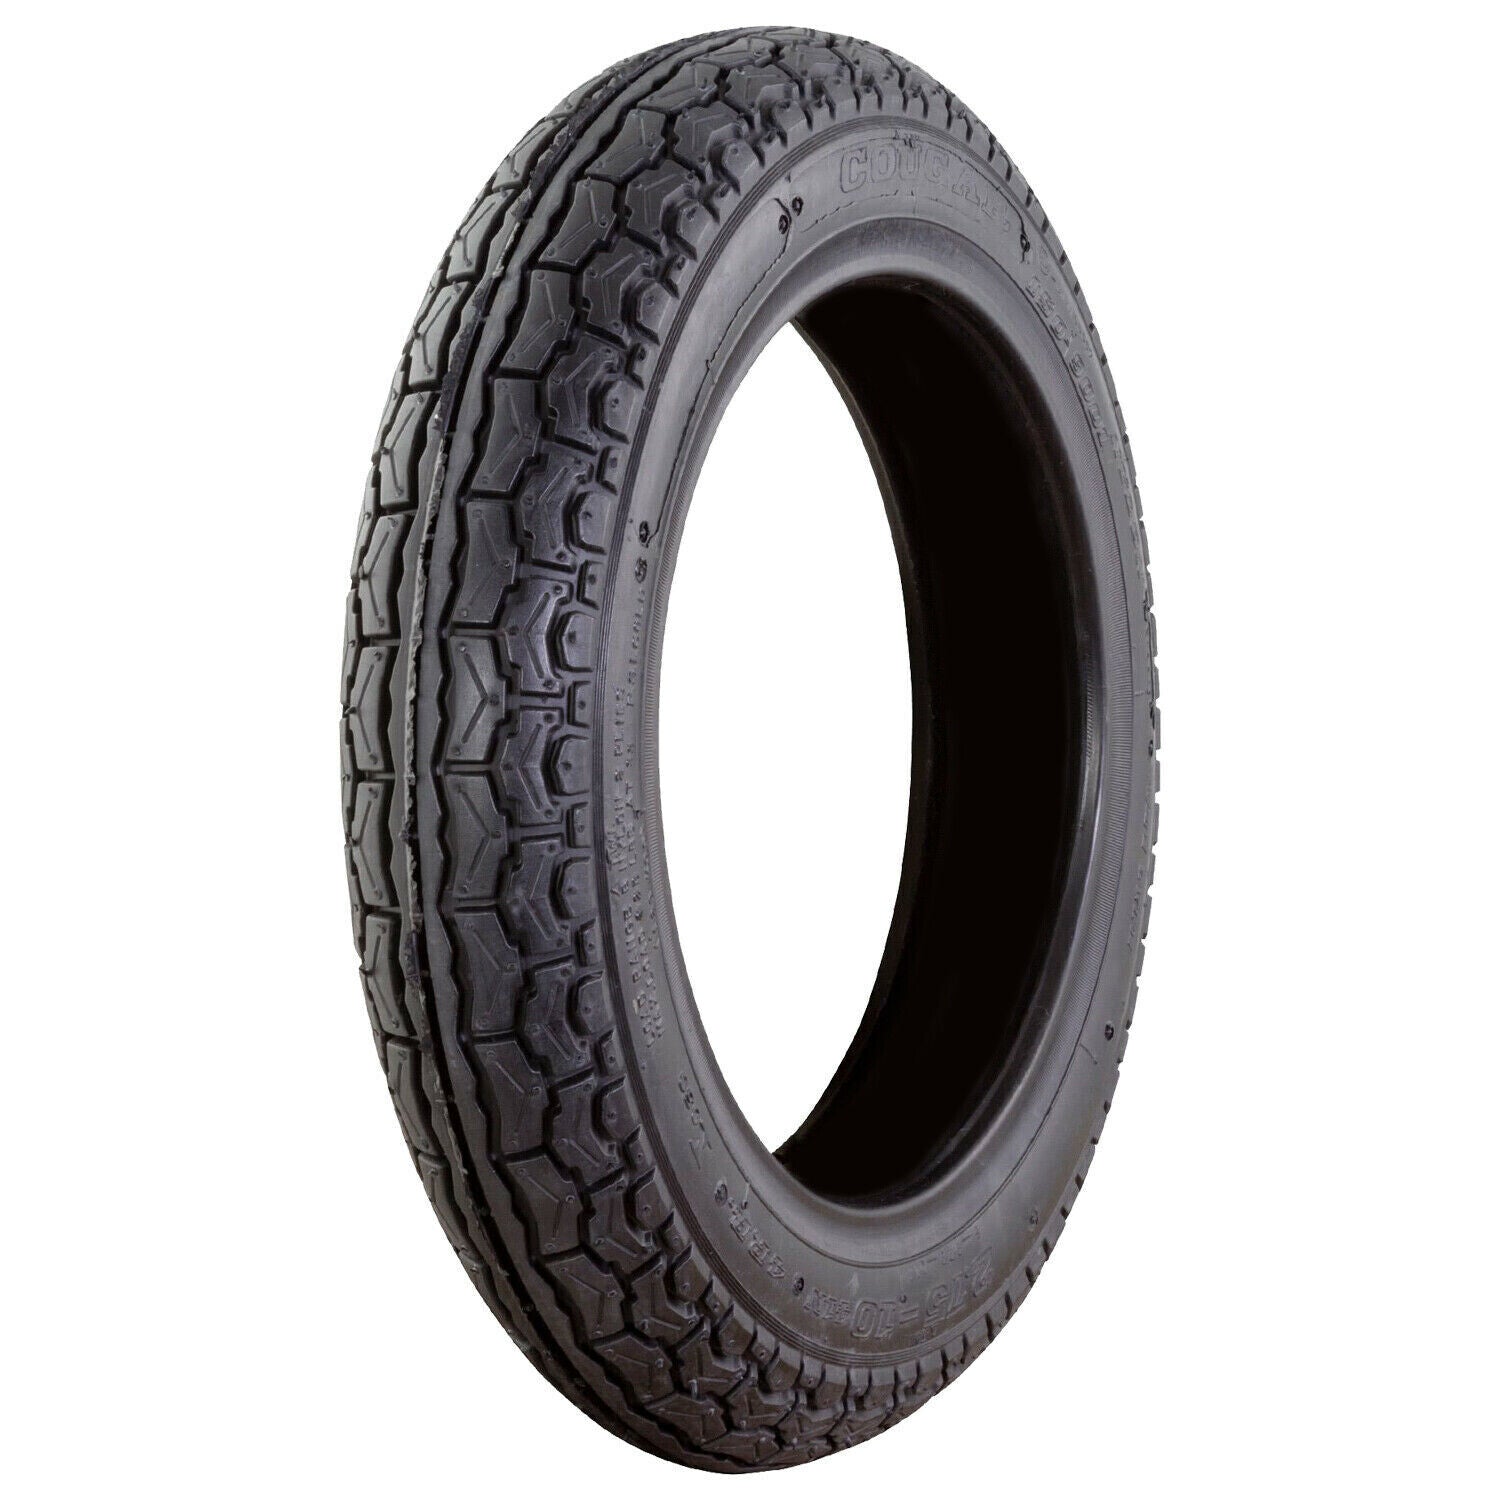 Kenda Tyre K329 2.75 x 10" Tubed - Honda Melody Mobility Scooter Boxracer